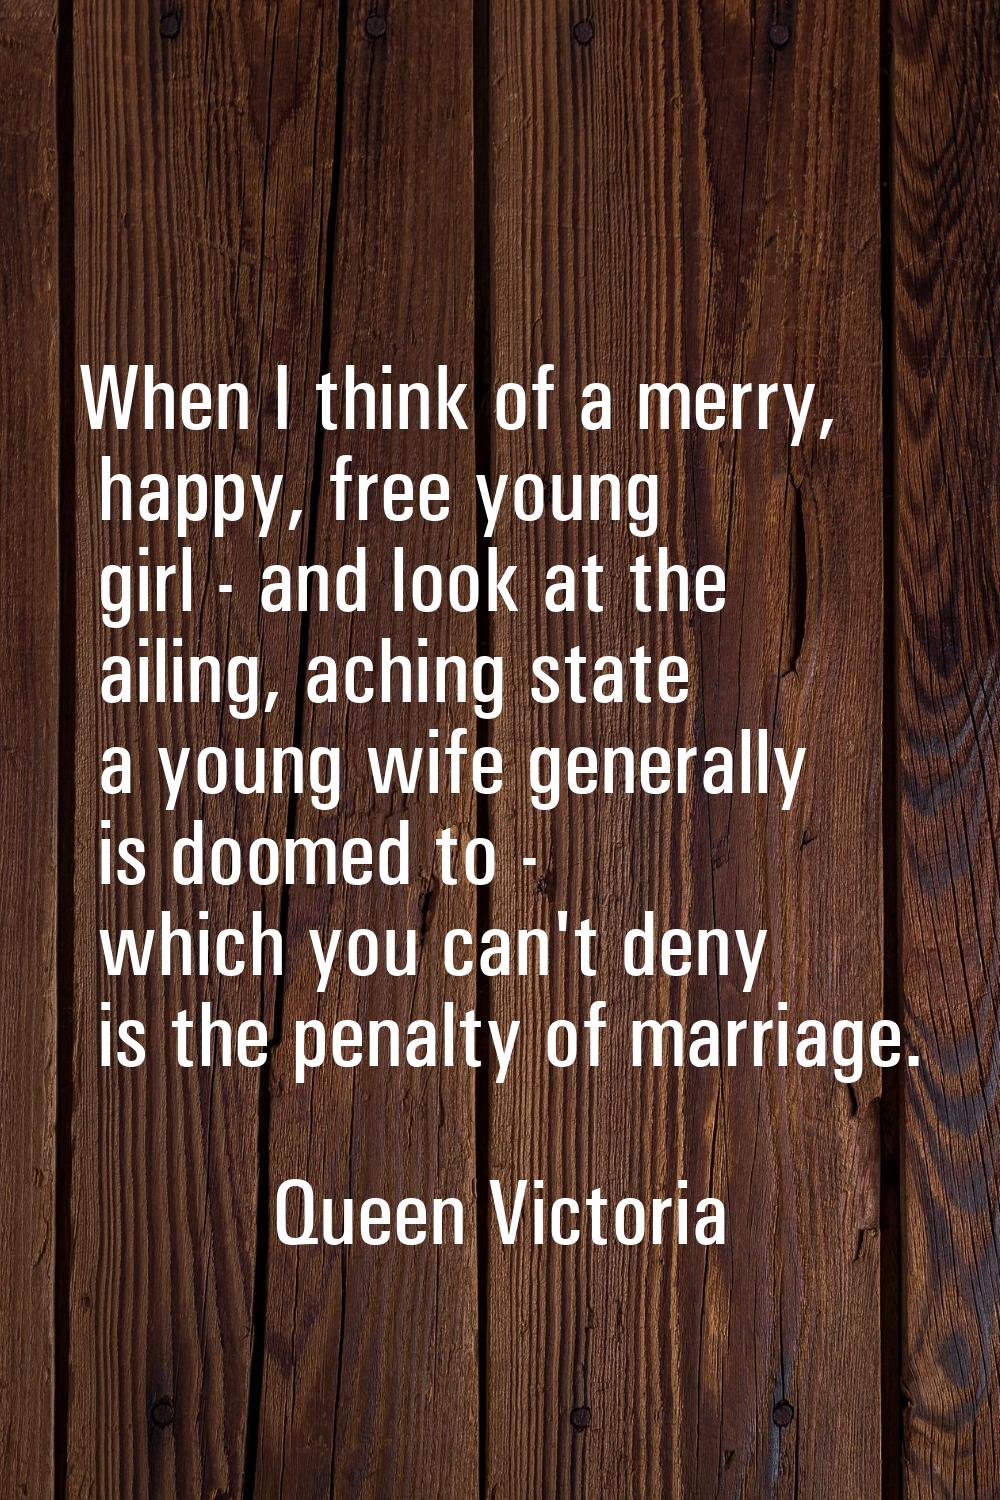 When I think of a merry, happy, free young girl - and look at the ailing, aching state a young wife